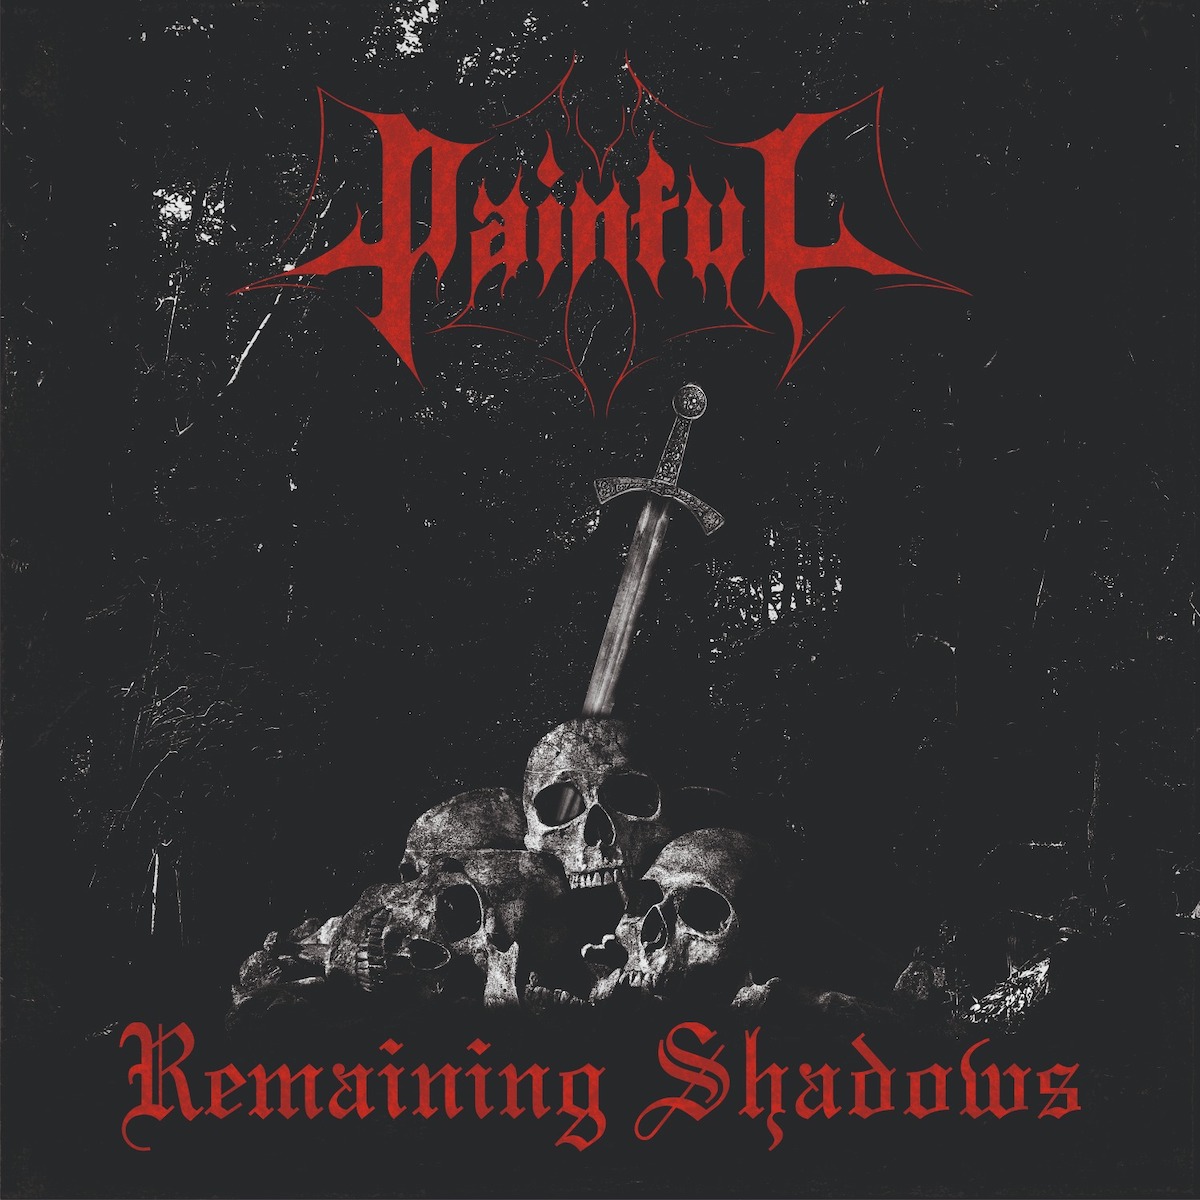 LISTEN: “Remaining Shadows” by Painful